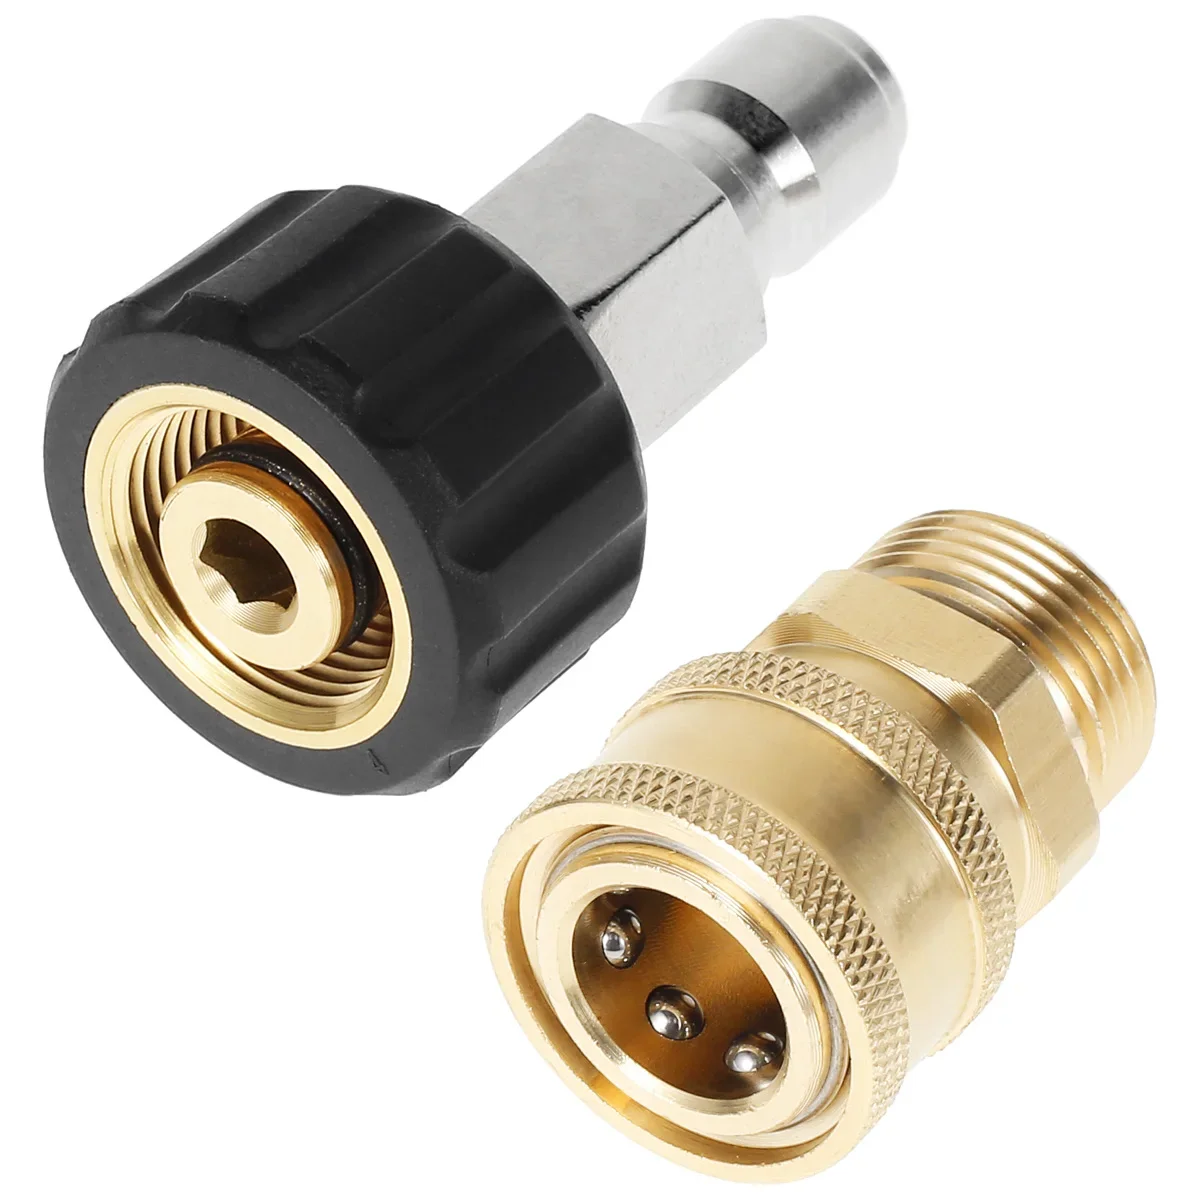 

Washer Quick Coupler Accessories Pressure Washer Adapter M22 14mm To 3/8 5000PSI Pressure Washer Connect Fitting Swivel Power